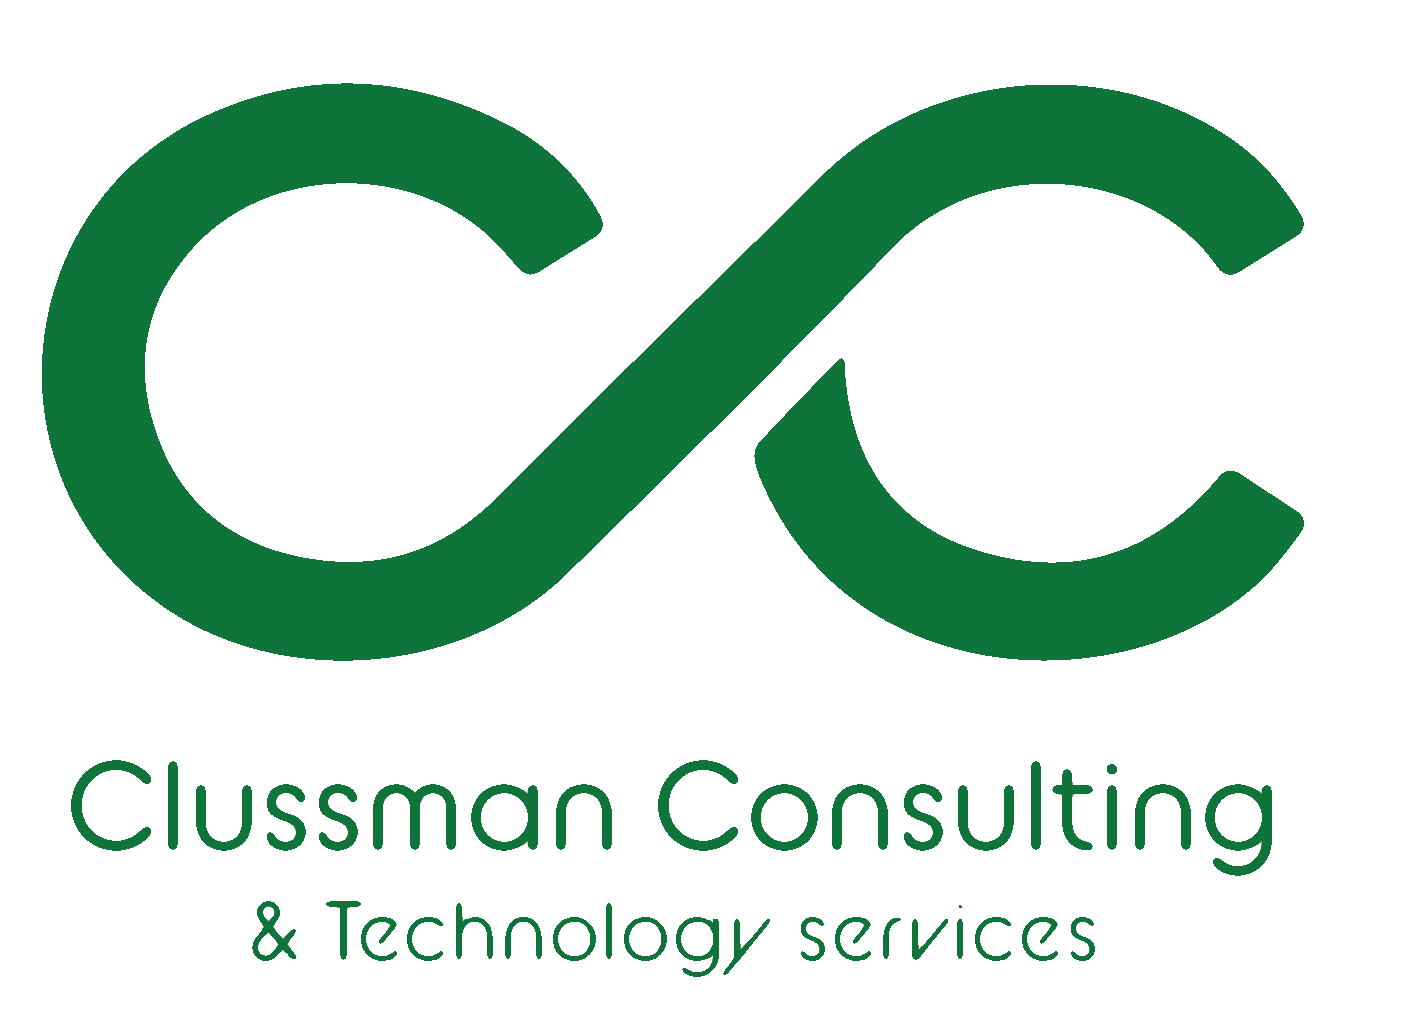 Clussman Consulting & Technology Services